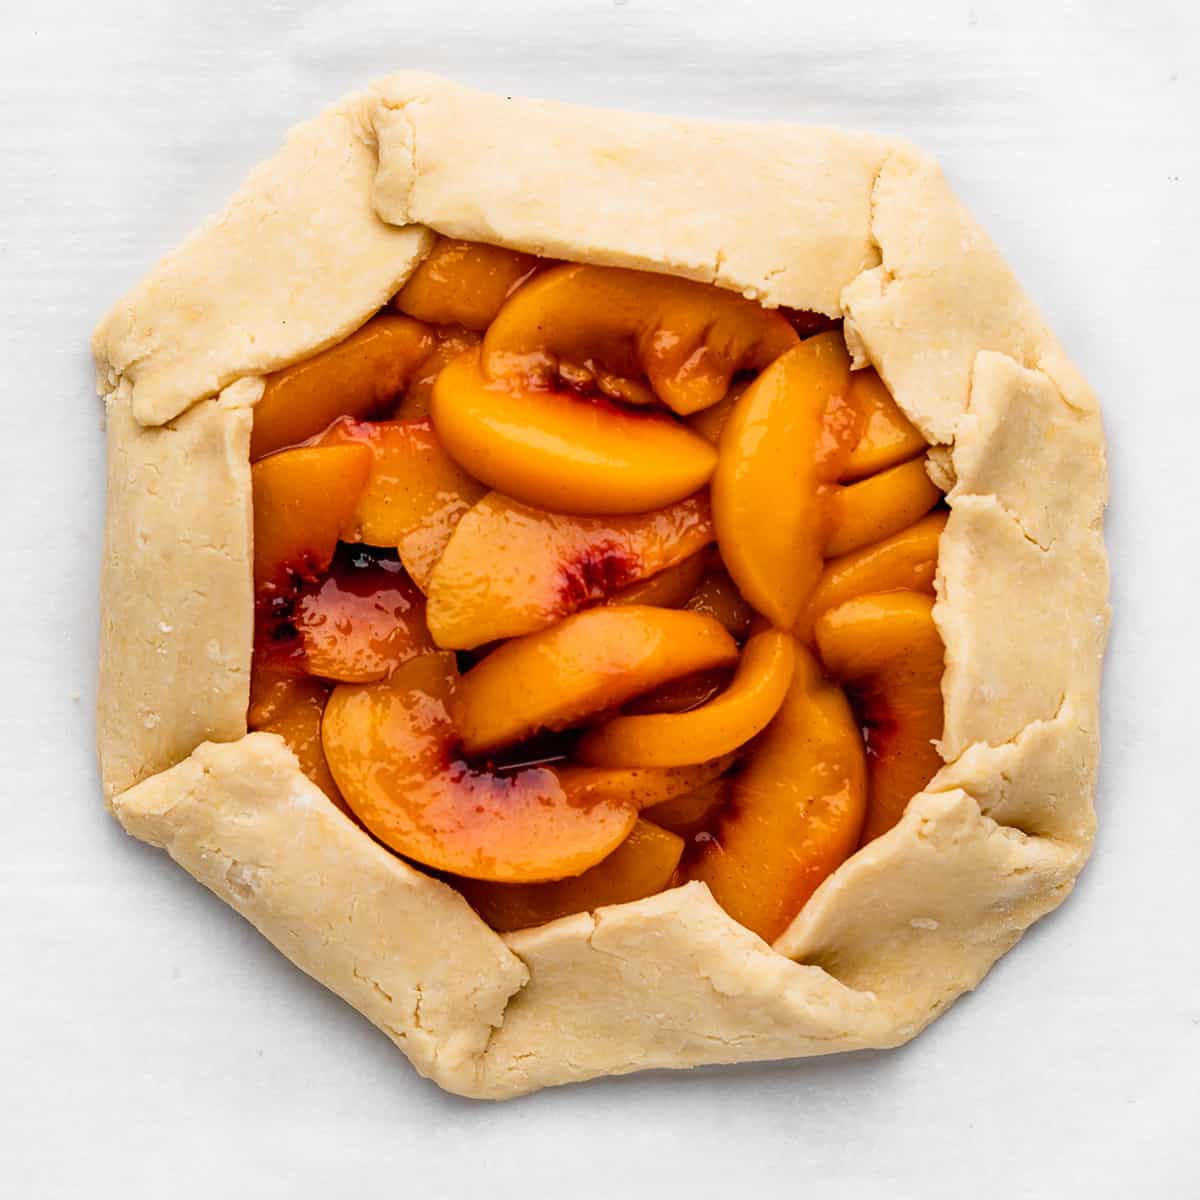 assembling peach galette - filling put into dough and dough edges pinched around the filling before baking